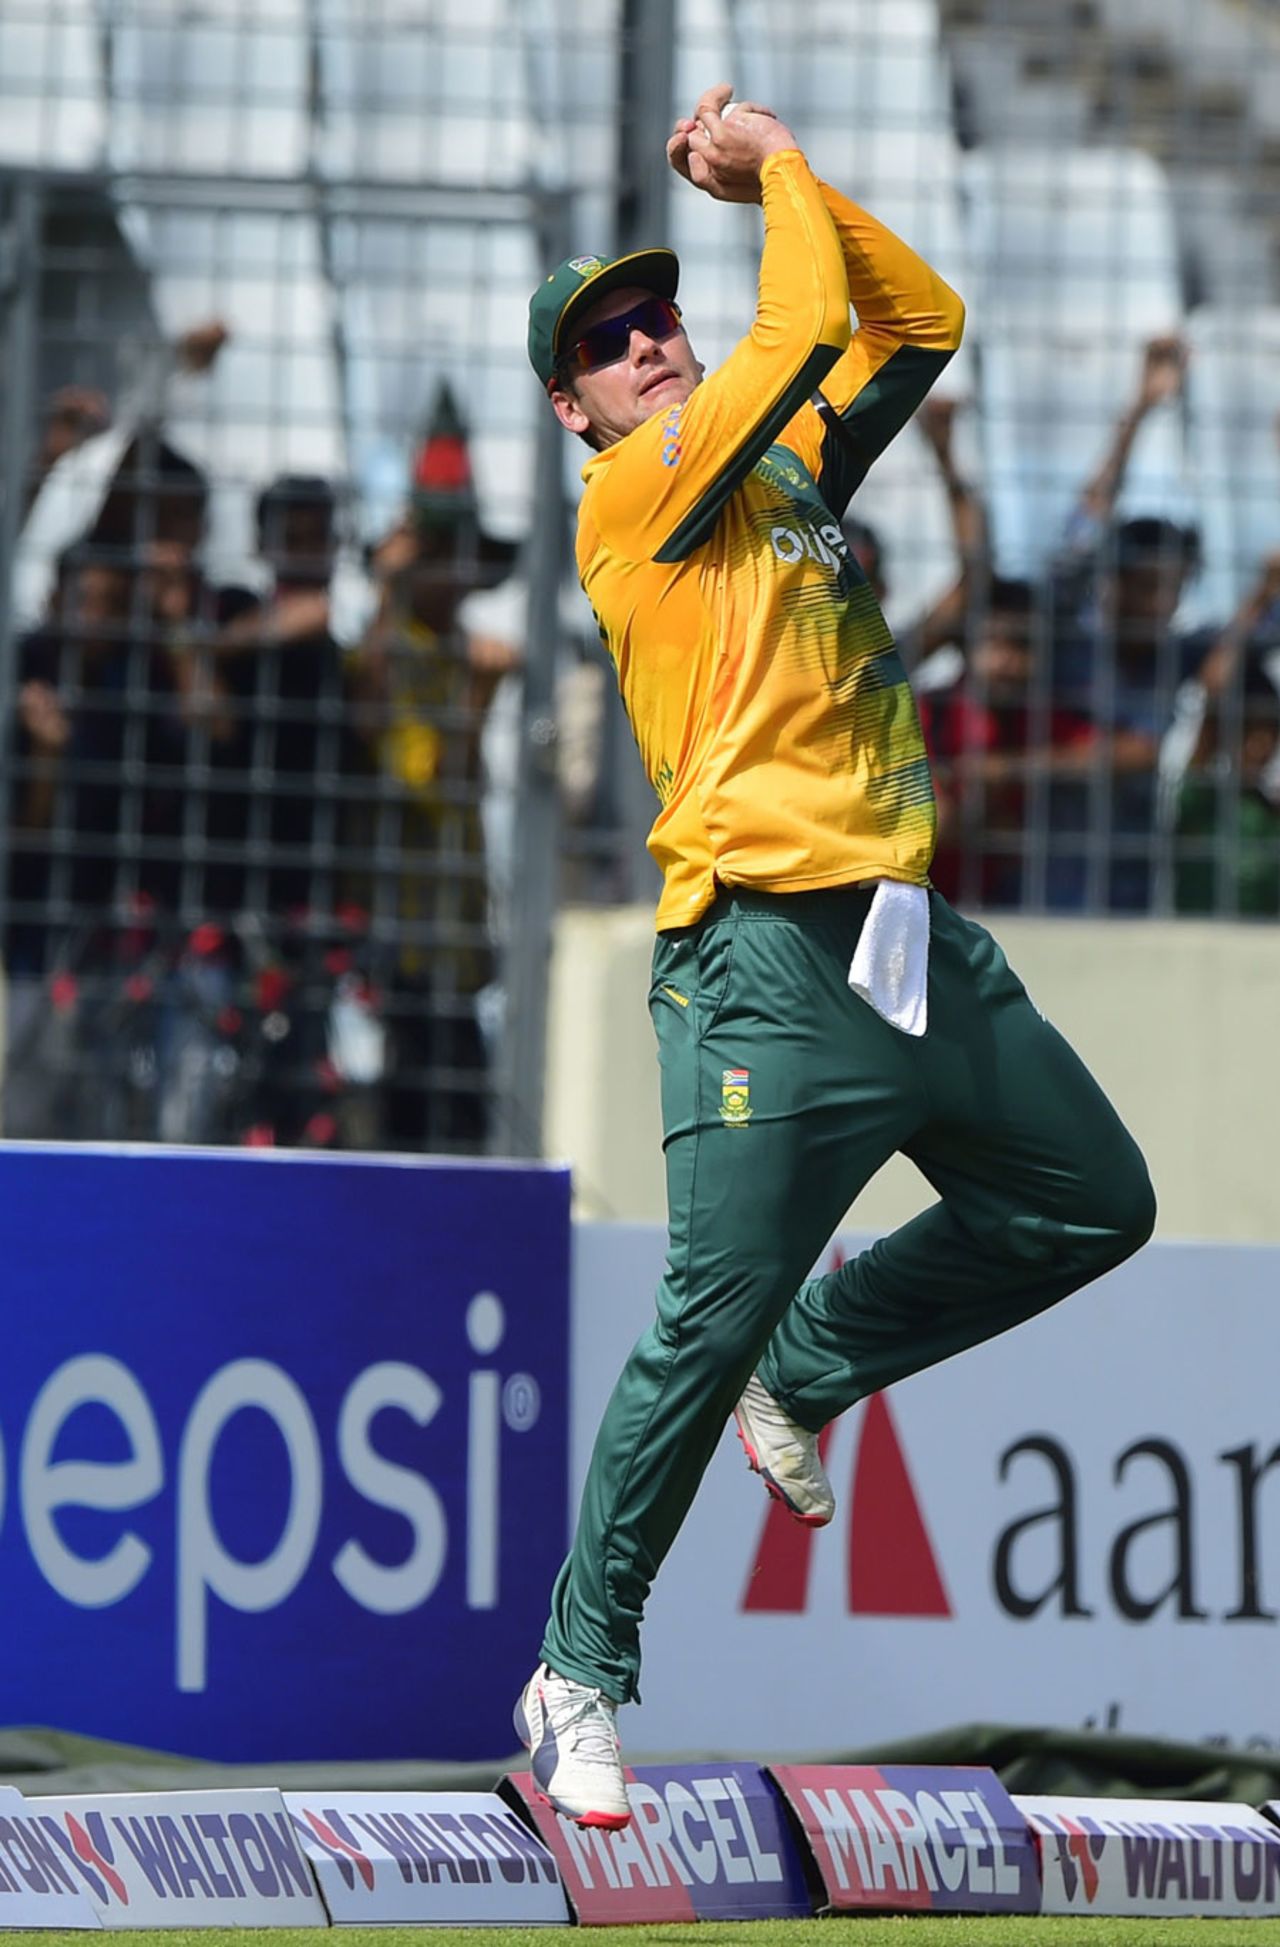 Rilee Rossouw took the catch to dismiss Shakib al Hasan, Bangladesh v South Africa, 2nd T20I, Mirpur, July 7, 2015